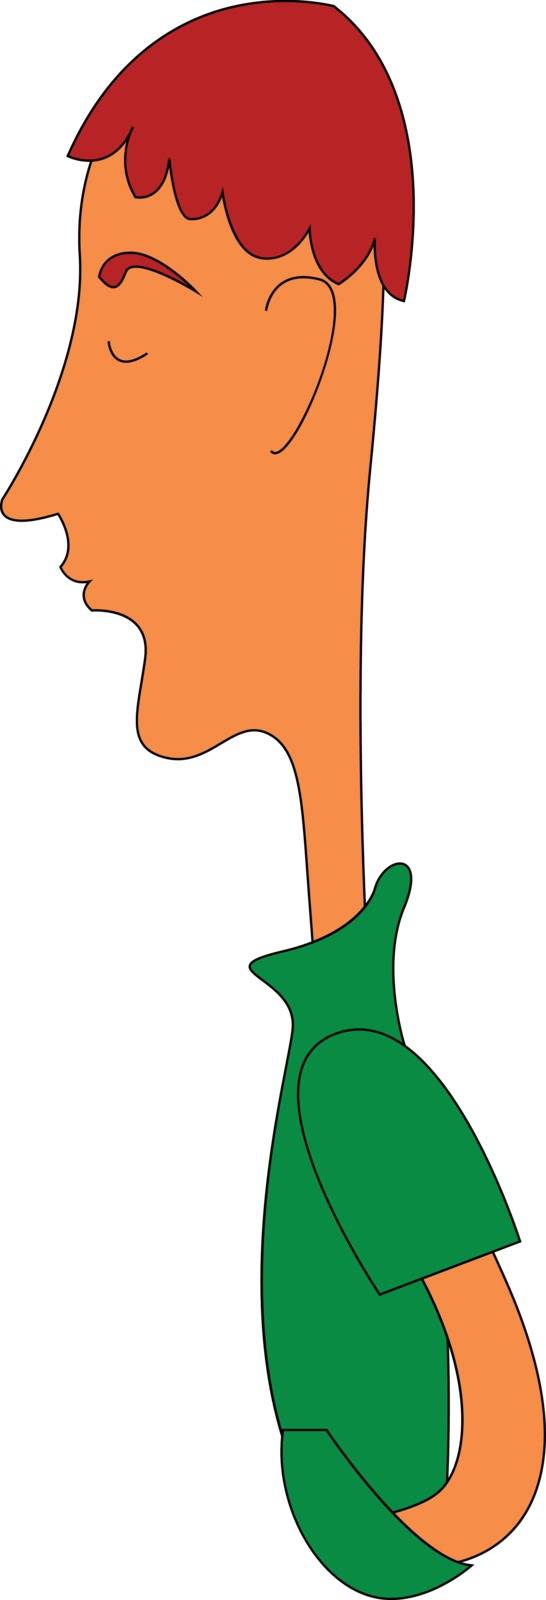 A man with red hair wearing green sweater with long neck, with eye brow, vector, color drawing or illustration. 